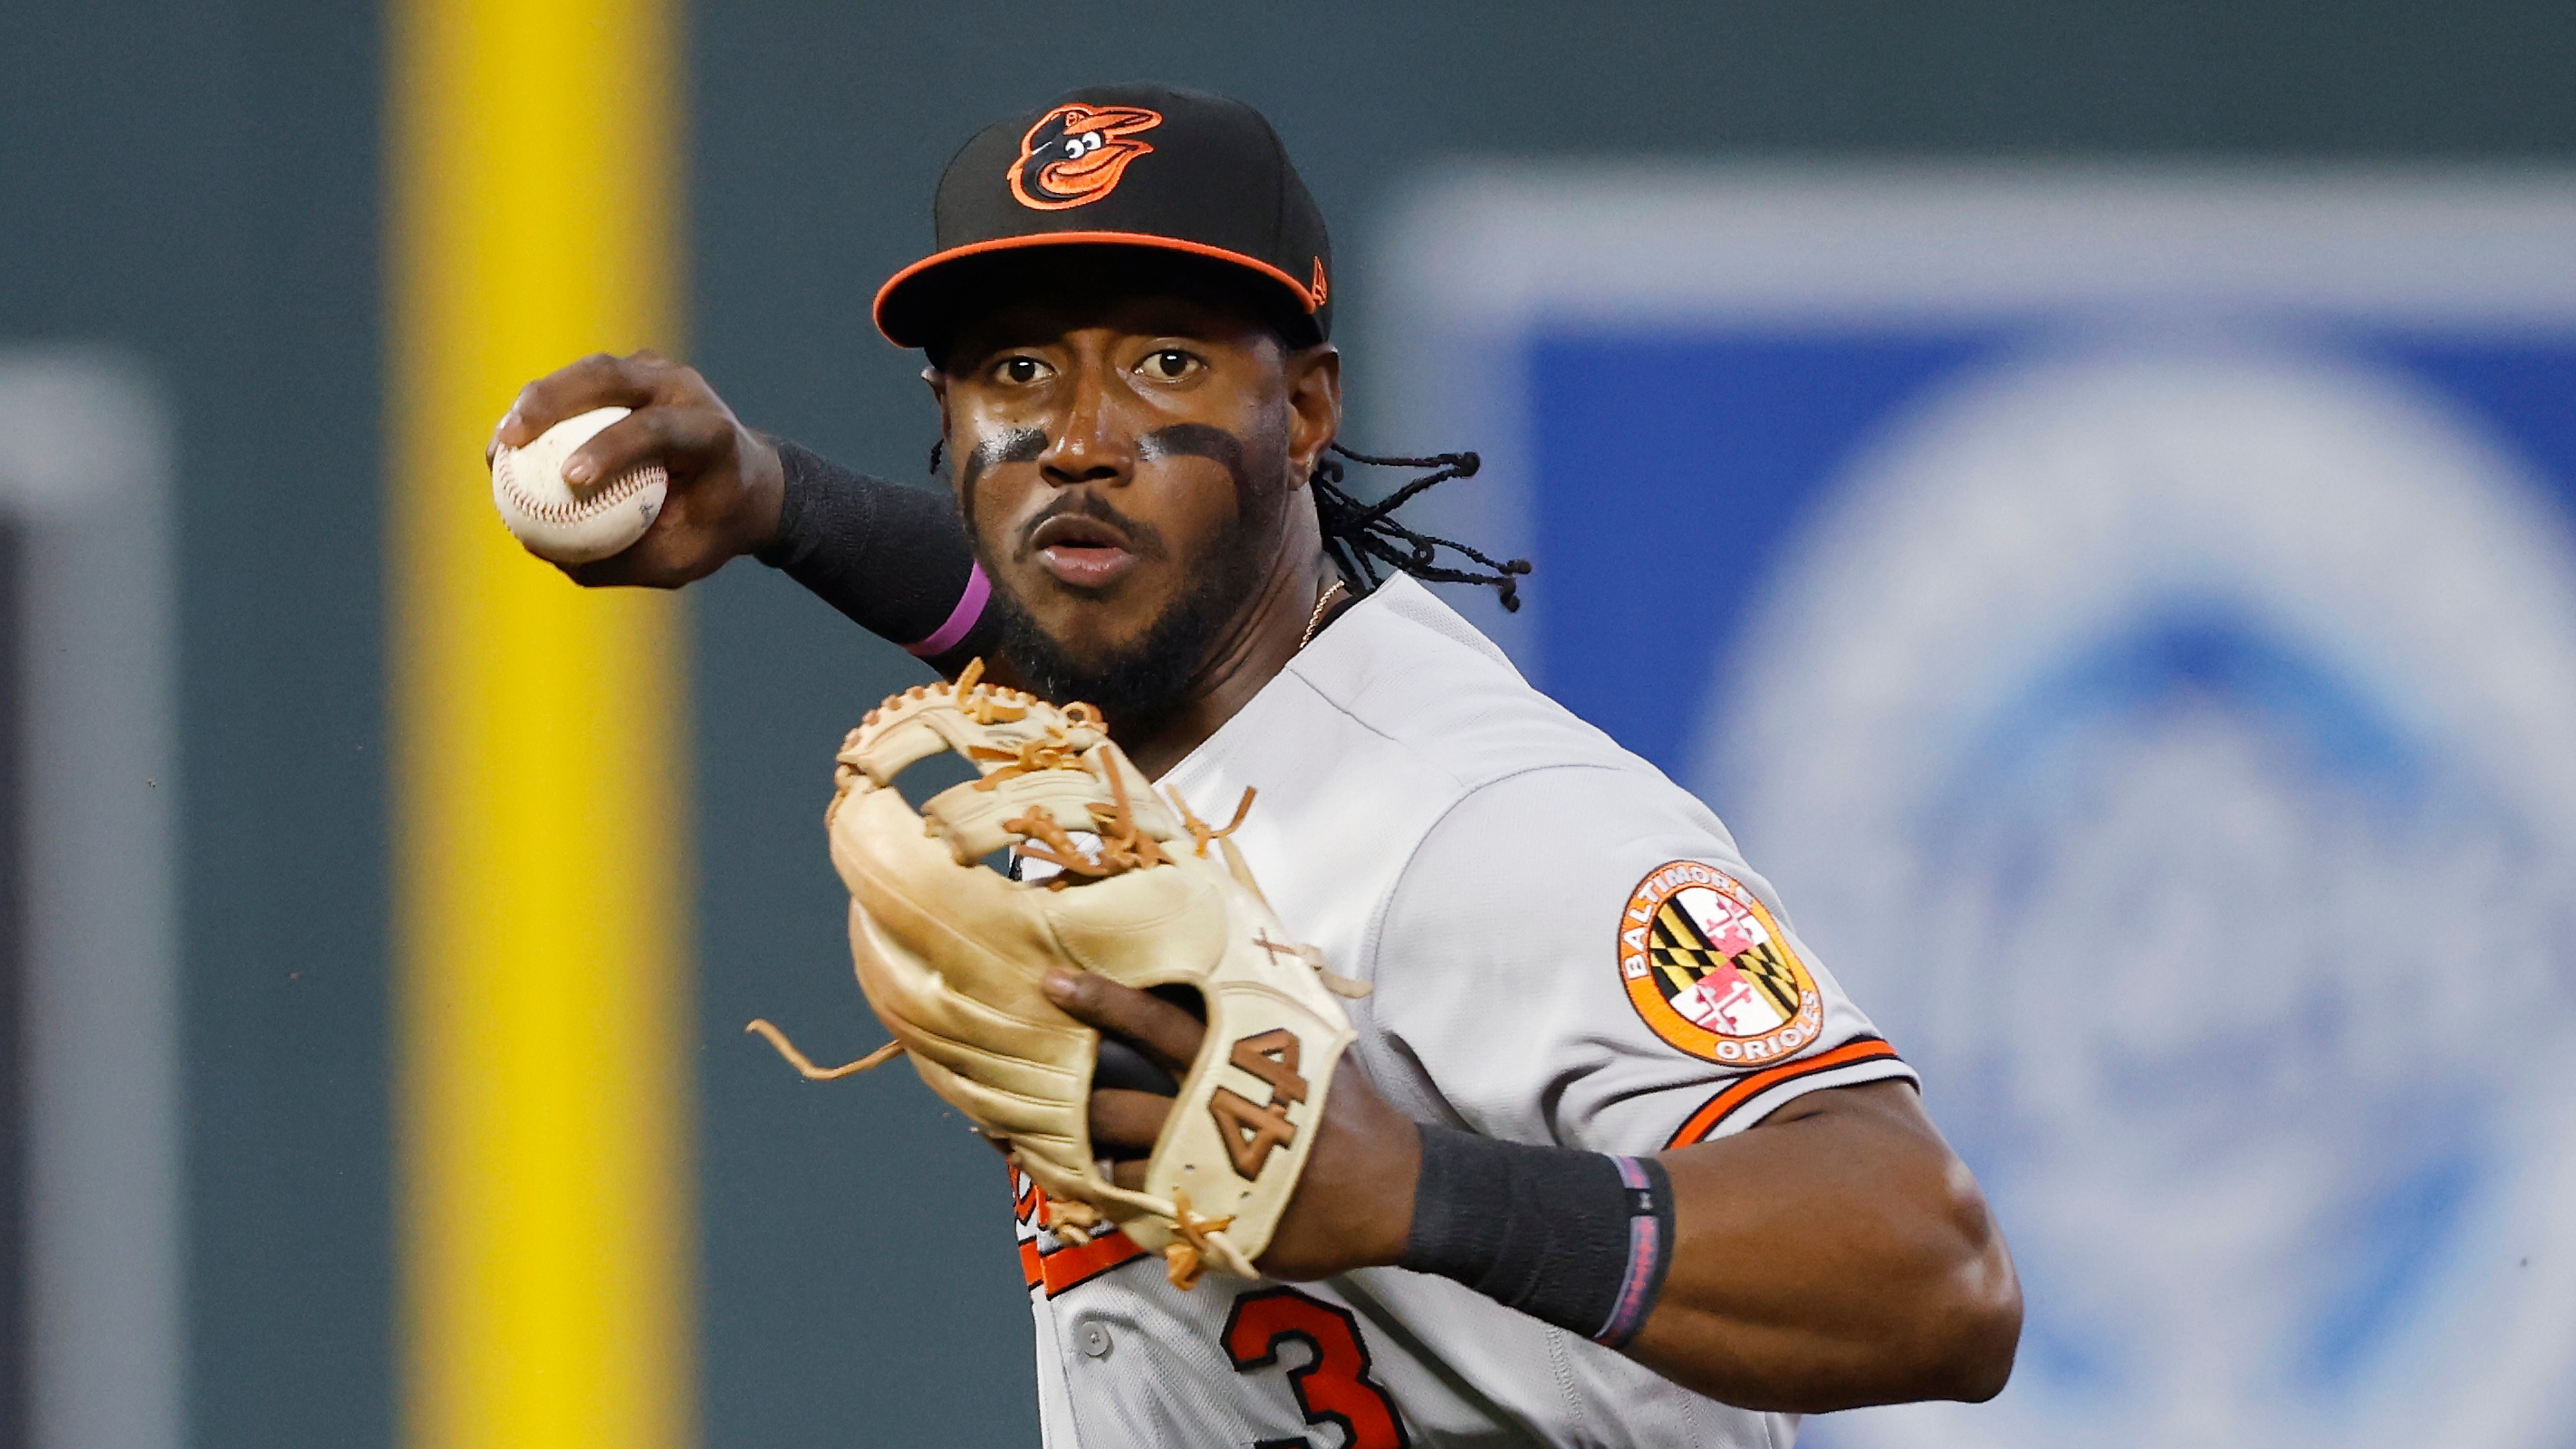 Cloned Orioles: Jorge Mateo - Baltimore Sports and Life